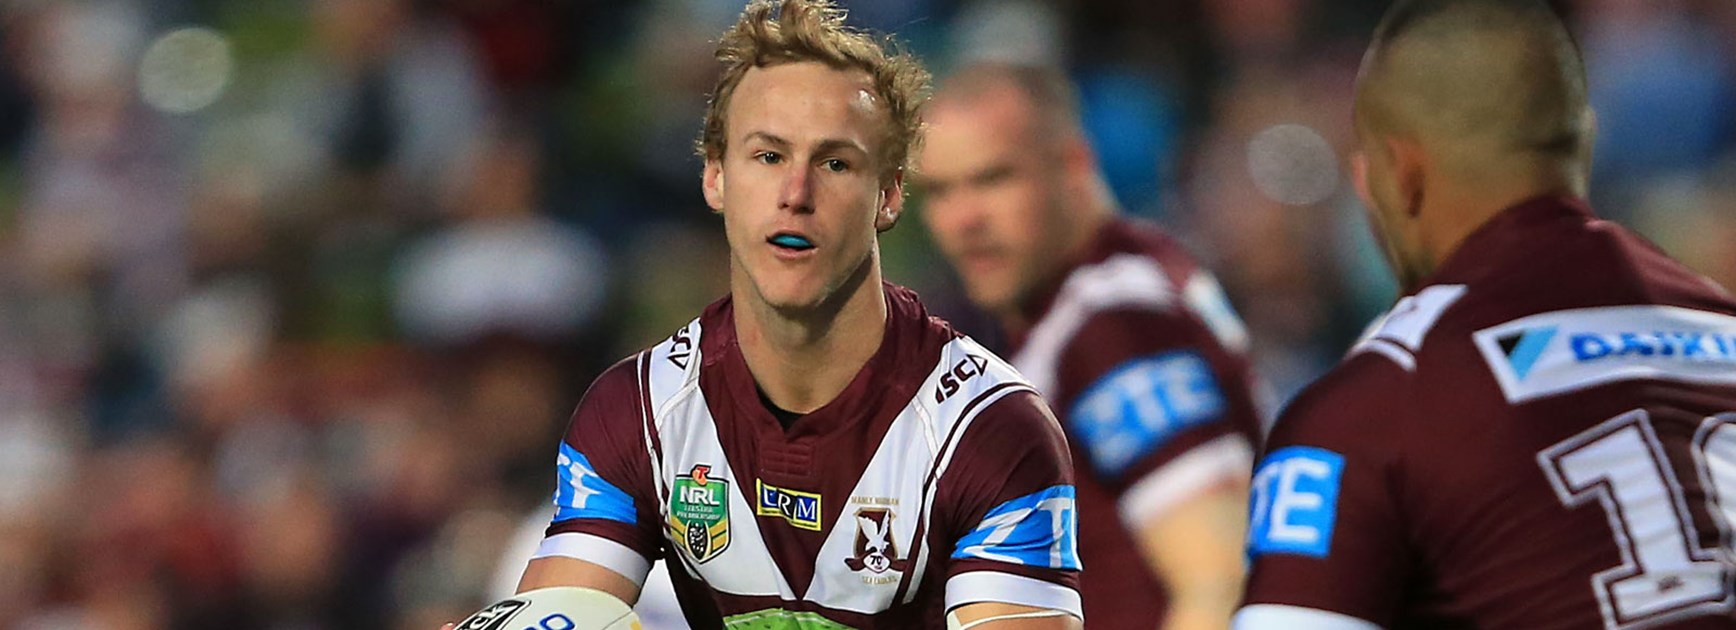 Sea Eagles halfback Daly Cherry-Evans against the Storm in Round 24.